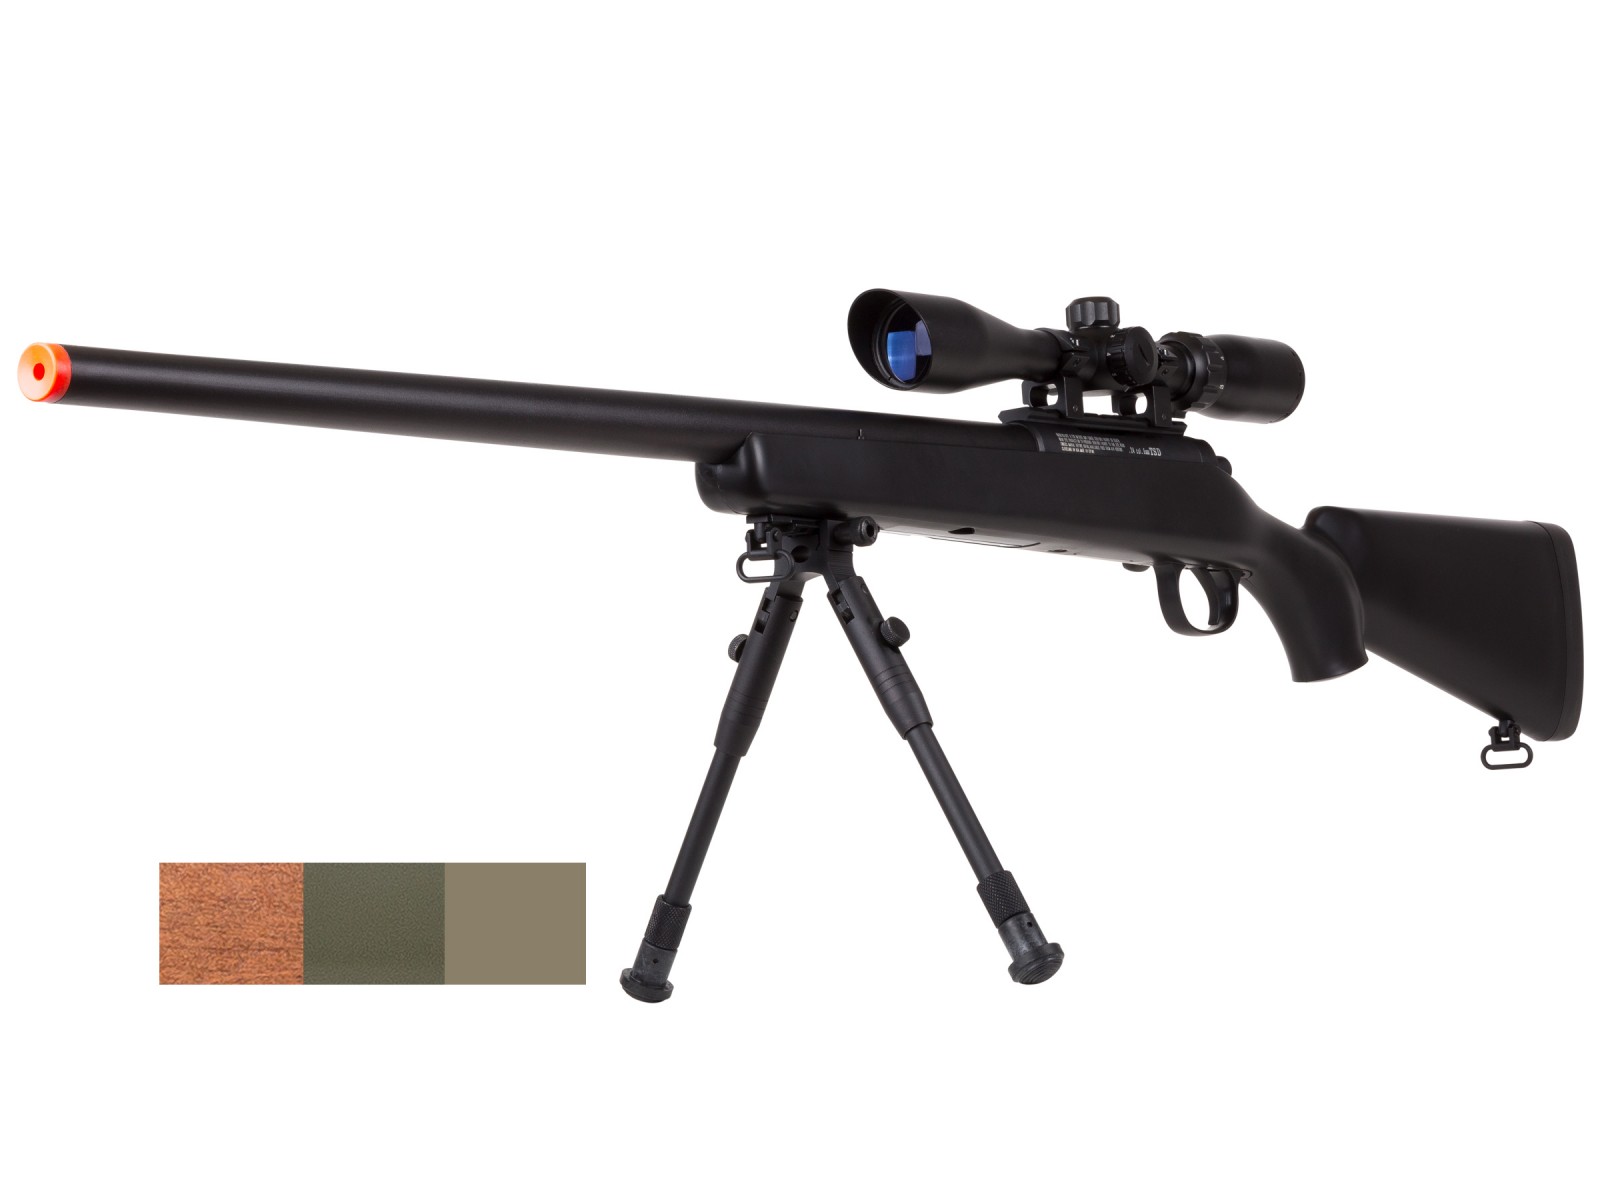 TSD SD700 Airsoft Sniper Rifle with 3-9x40 Scope, Bipod